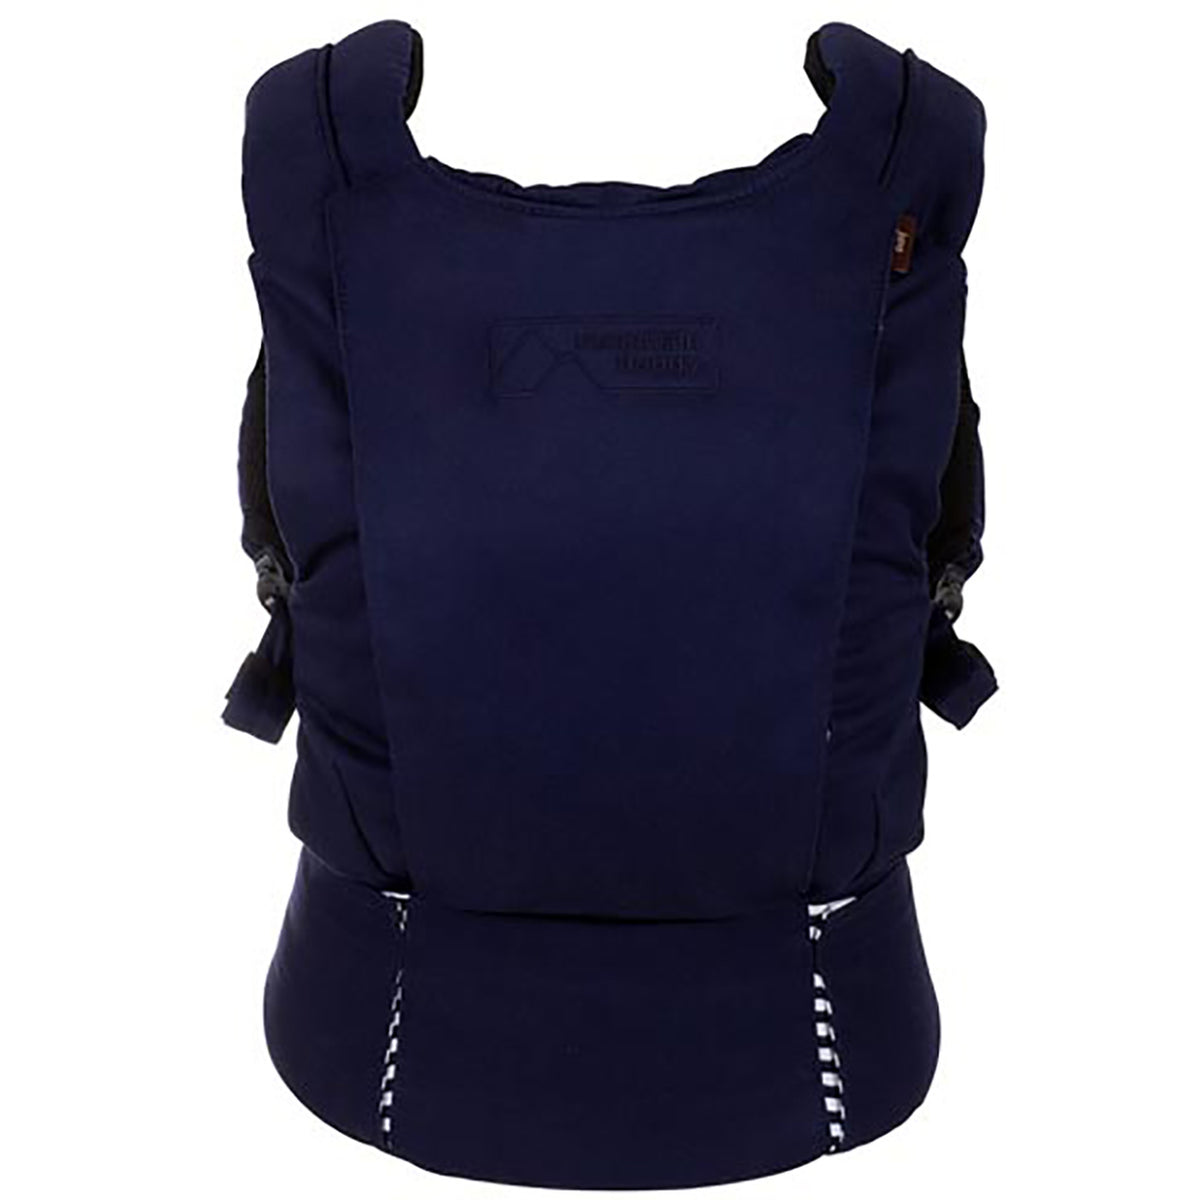 Mountain Buggy Juno Infant Carrier - Happy Baby